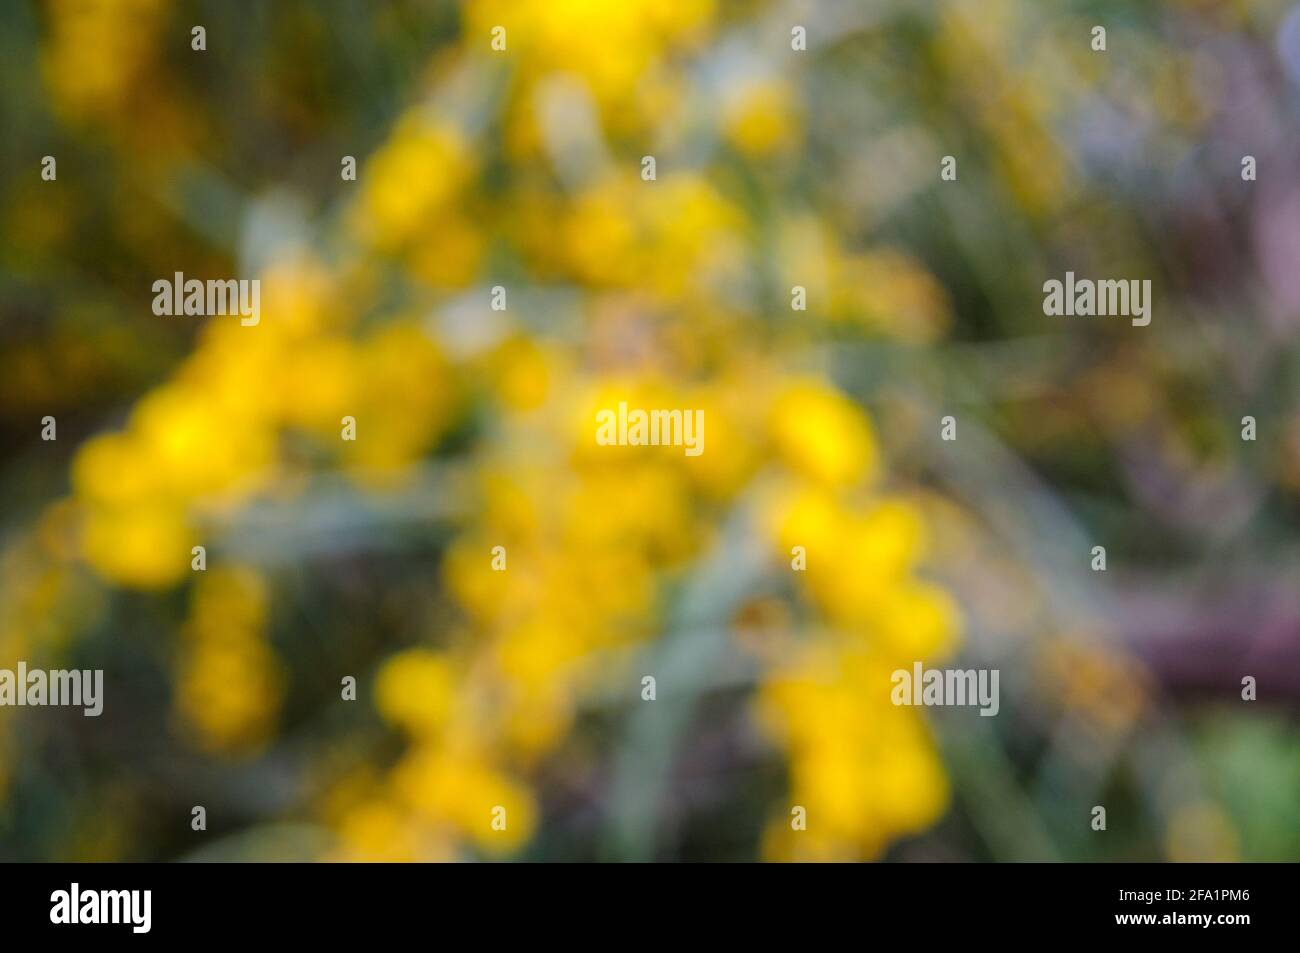 Abstract Out of focus image of the yellow flowers of an Acacia saligna, commonly known by various names including coojong, golden wreath wattle, orang Stock Photo